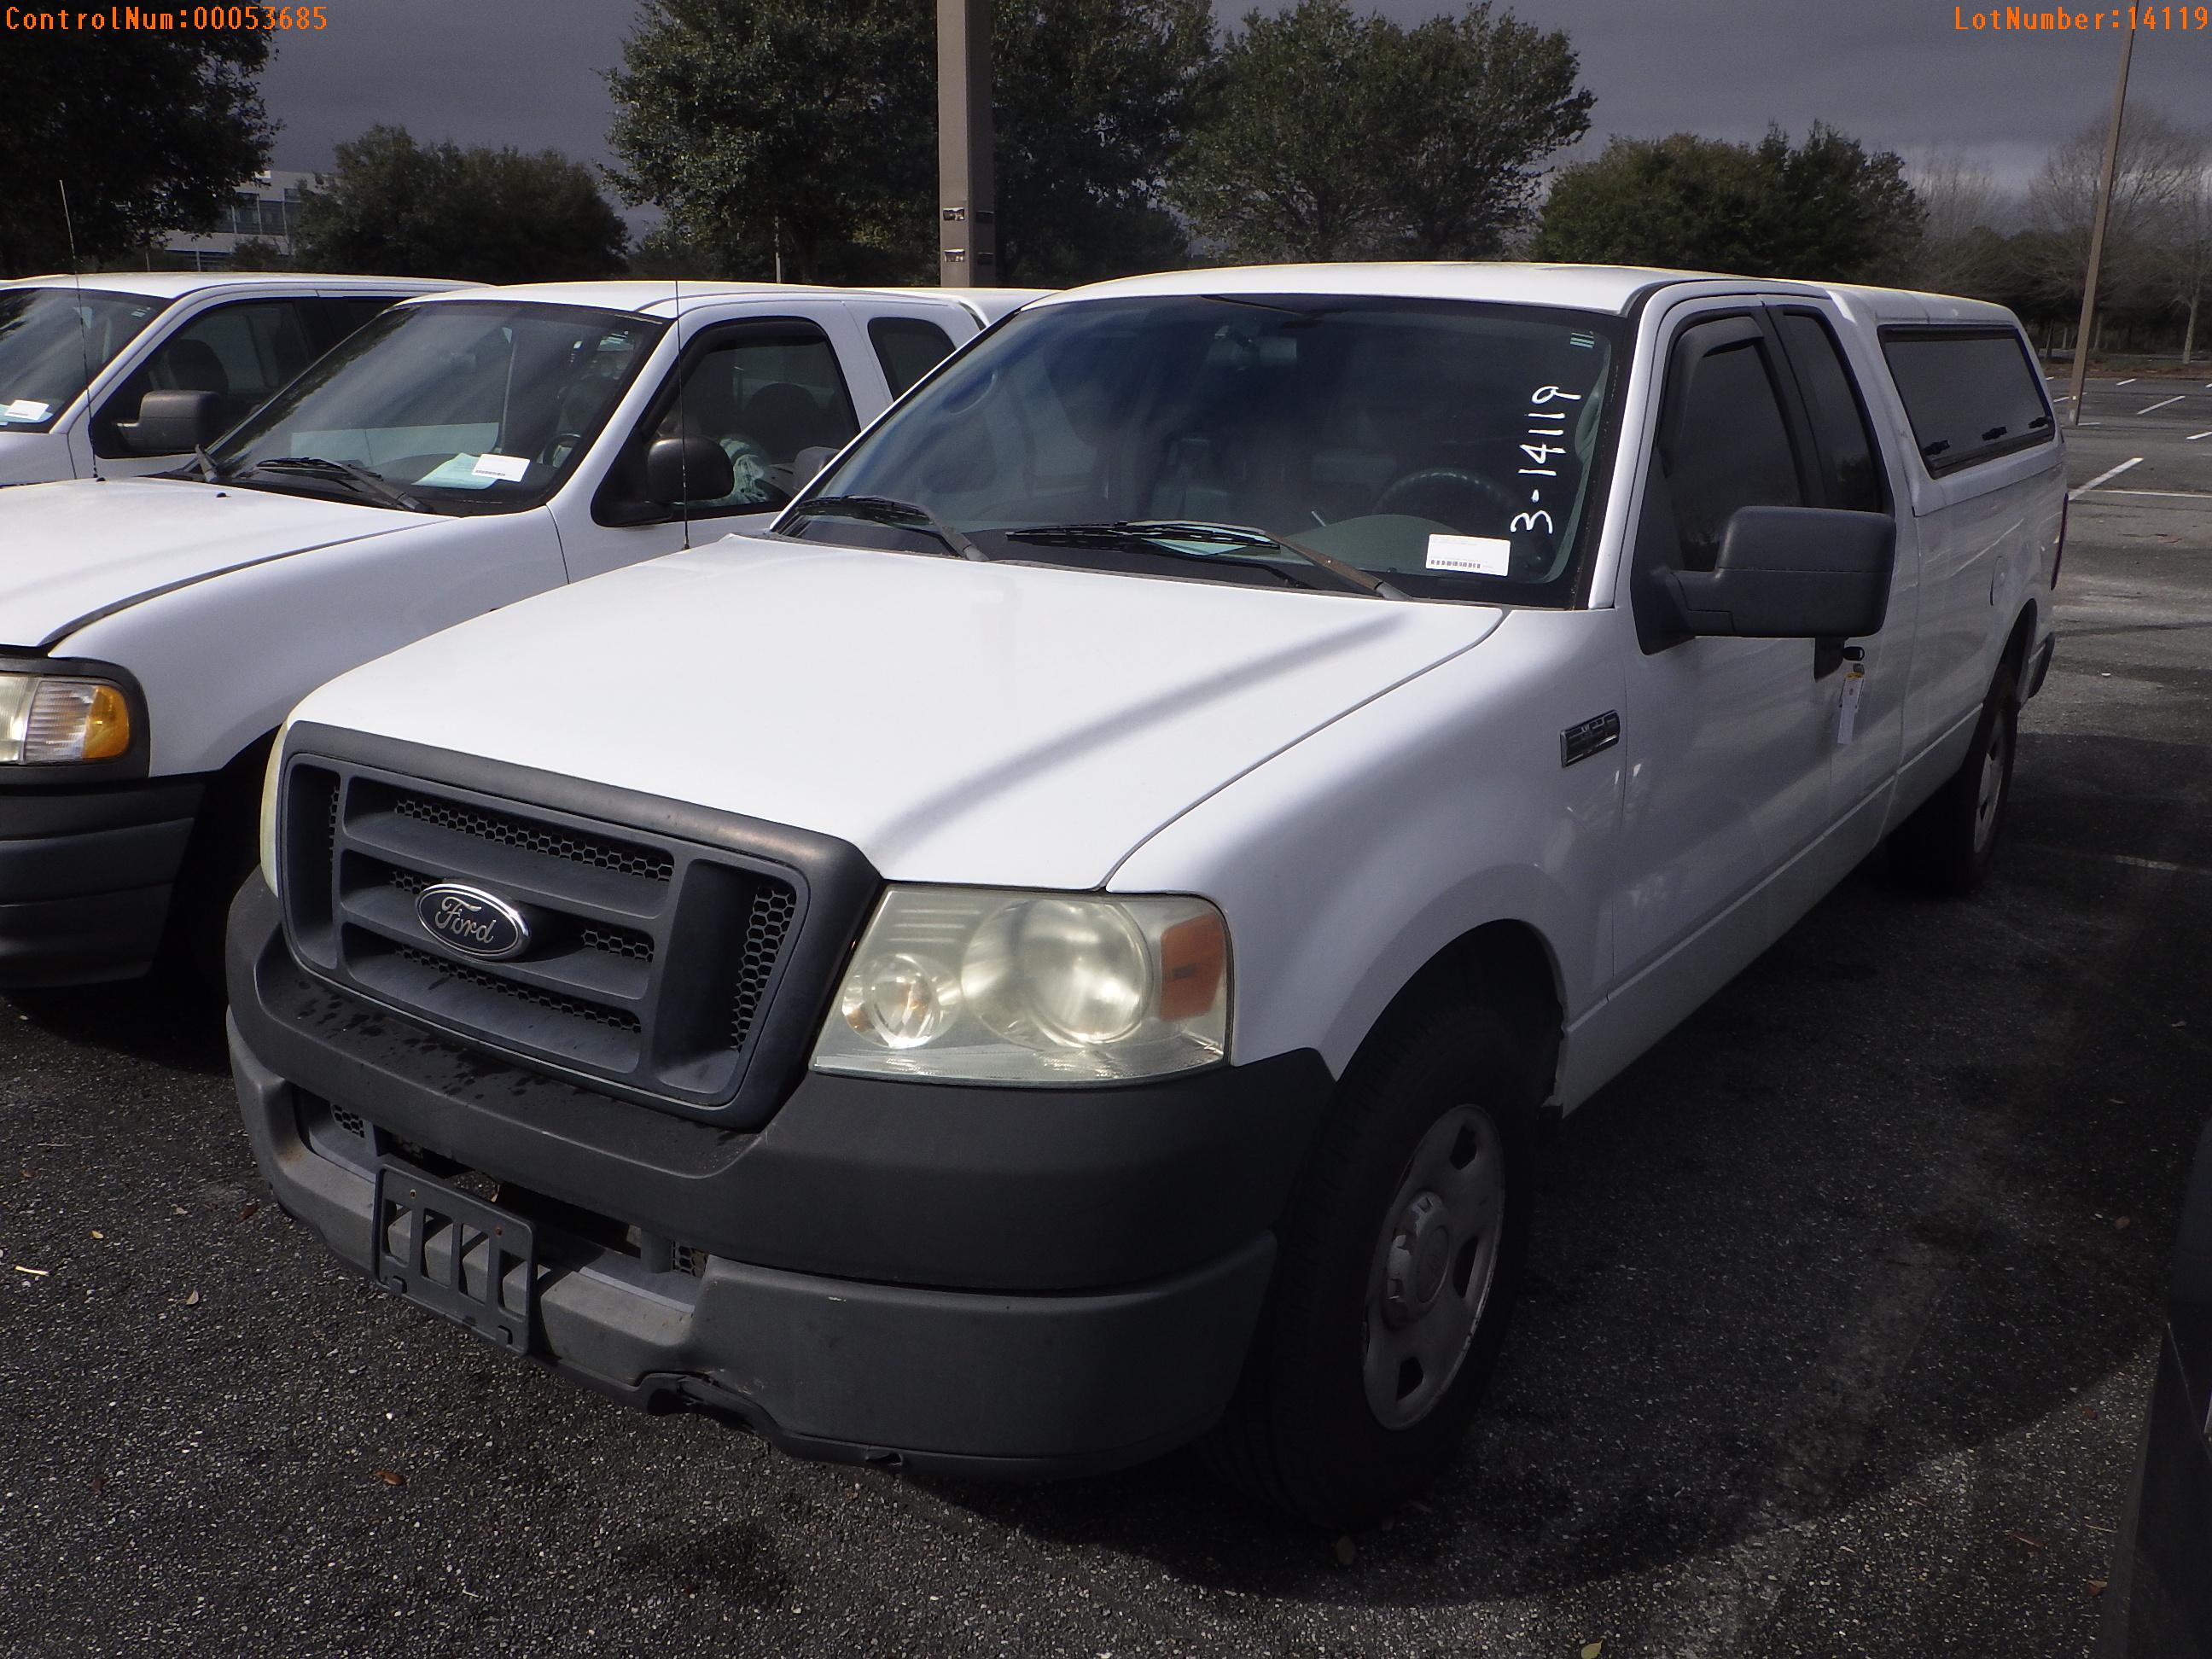 3-14119 (Trucks-Pickup 2D)  Seller: Florida State A.C.S. 2005 FORD F150